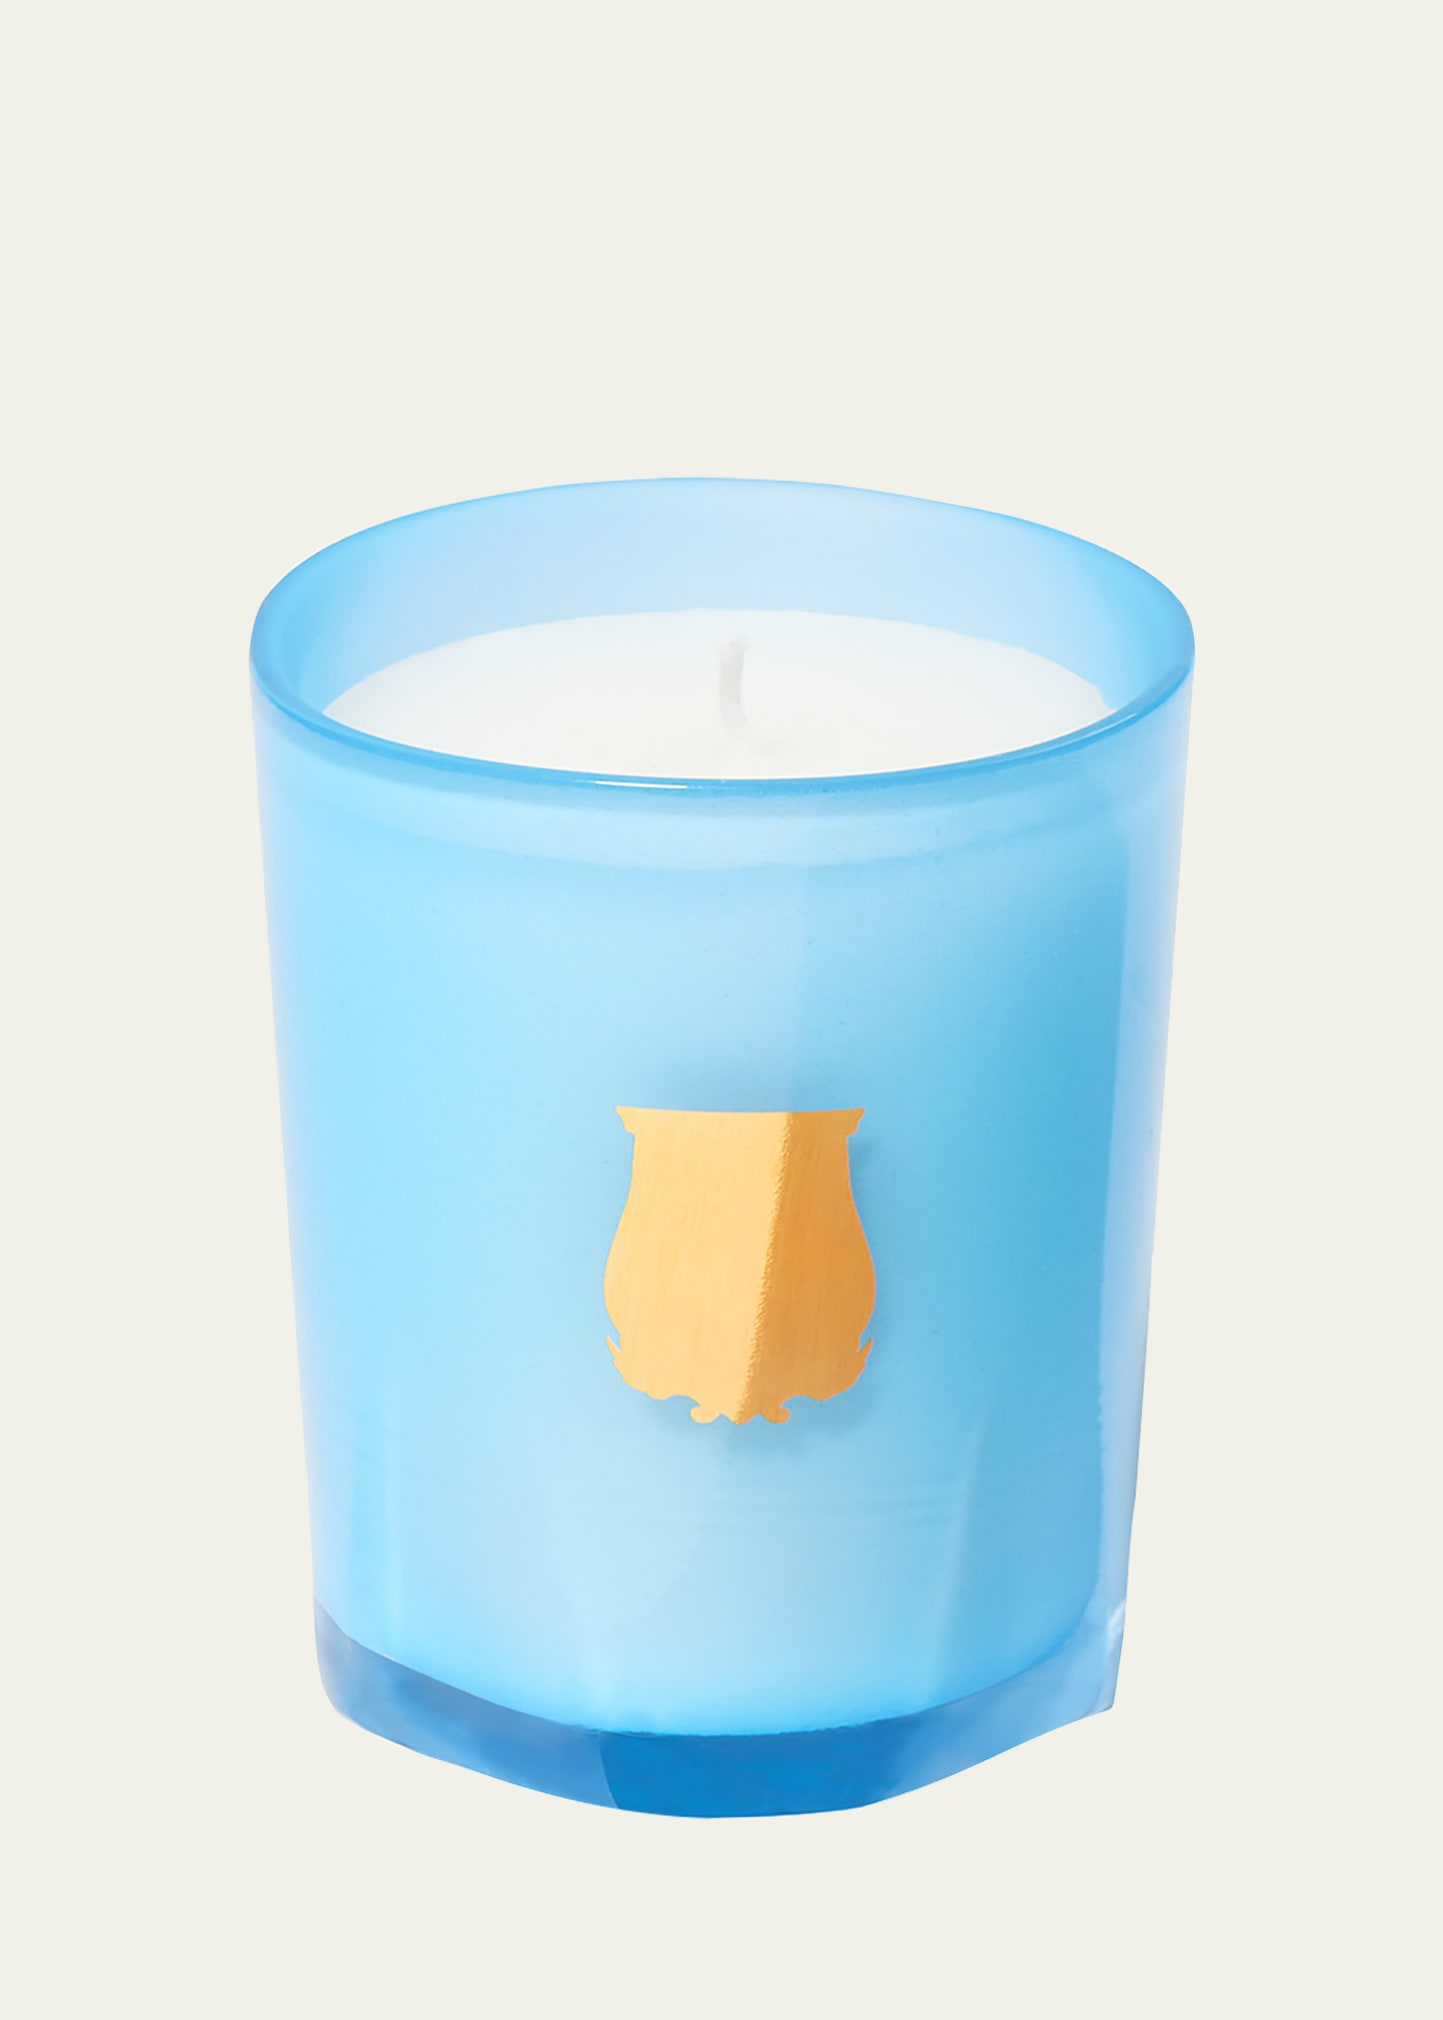 Trudon Versailles Candle, 70g In Blue